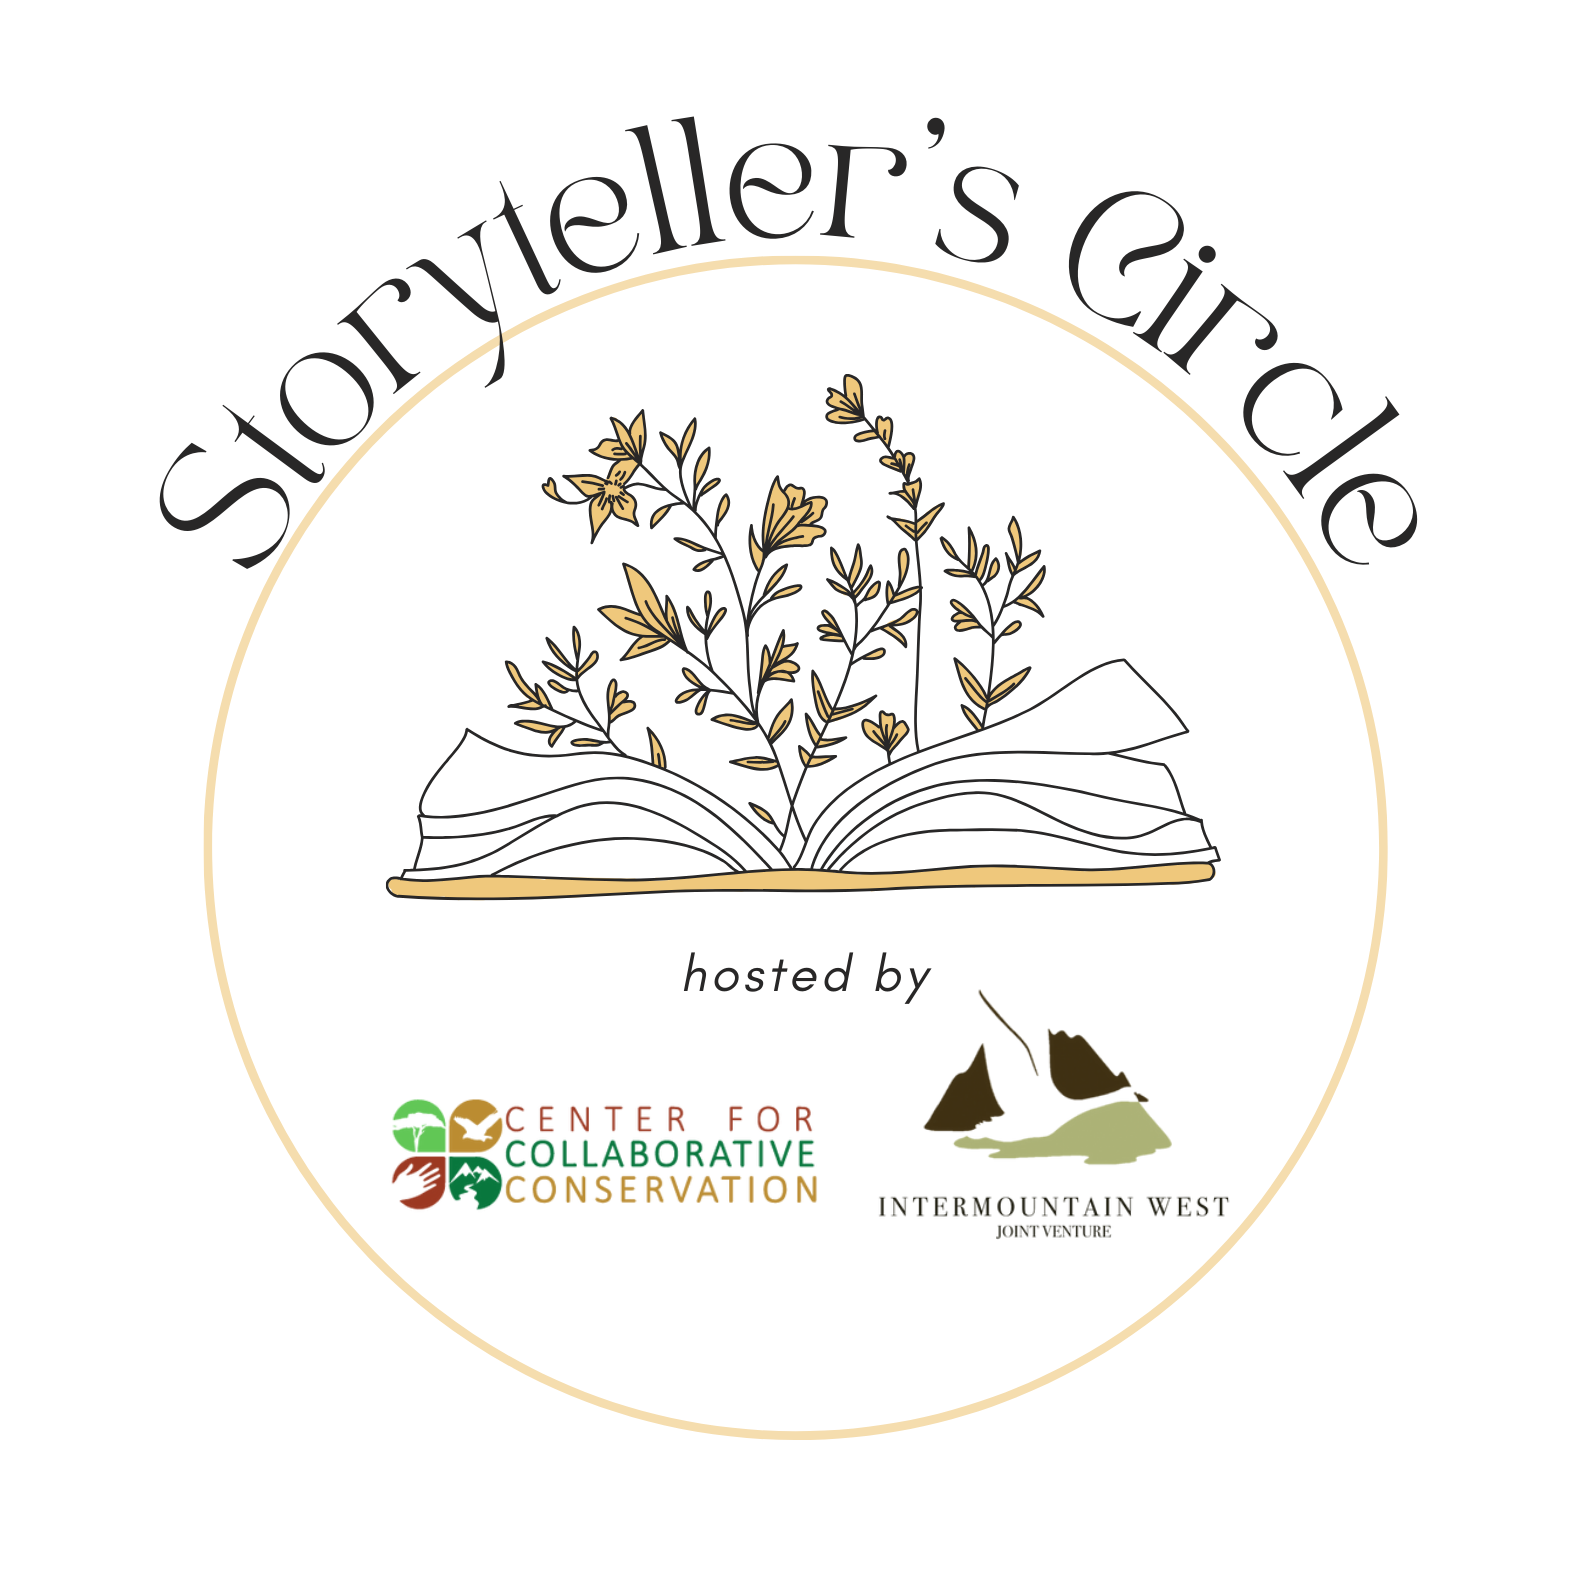 Storyteller's Circle hosted by the Center for Collaborative Conservation and Intermountain West Joint Venture